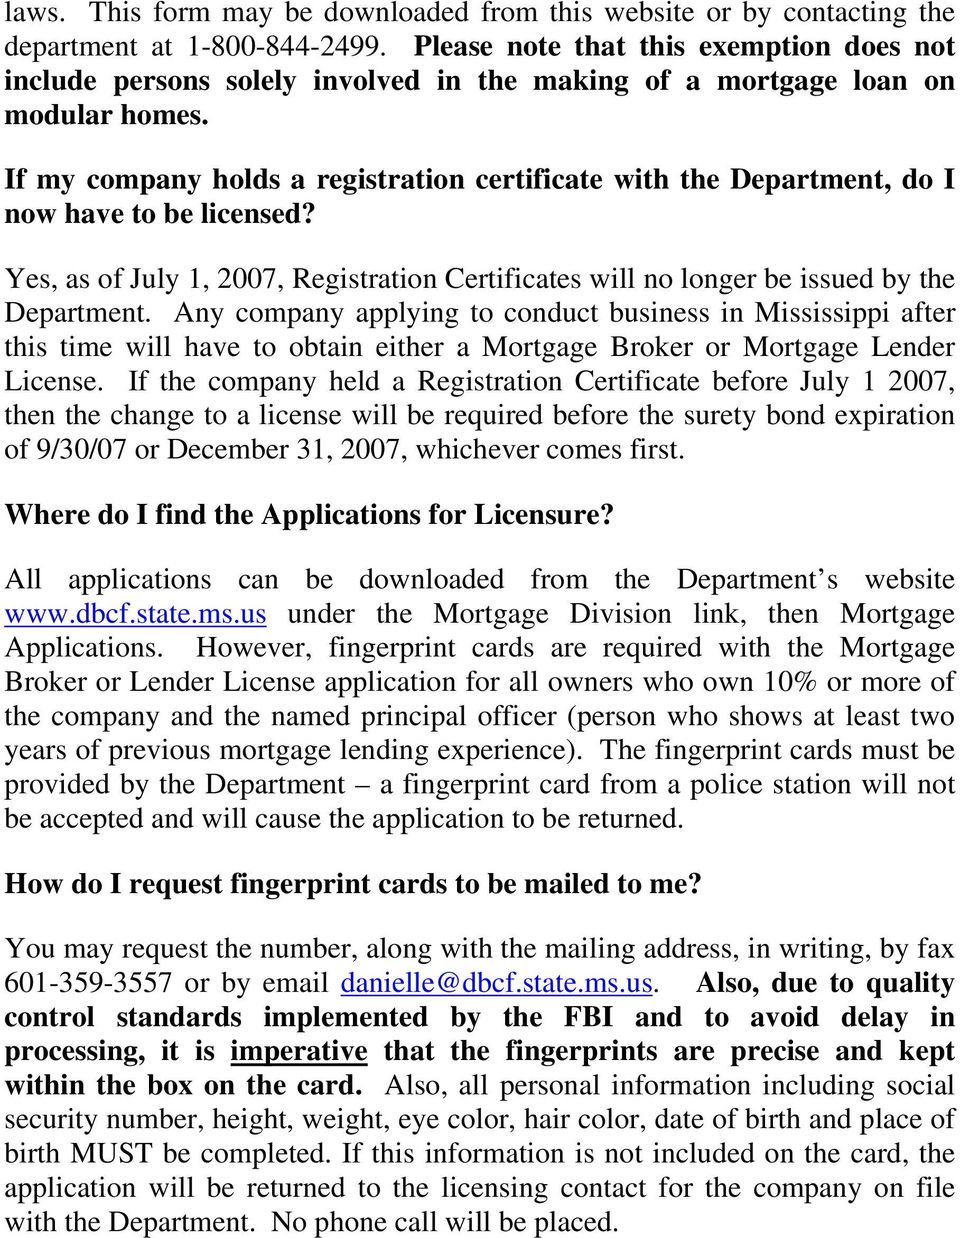 If my company holds a registration certificate with the Department, do I now have to be licensed? Yes, as of July 1, 2007, Registration Certificates will no longer be issued by the Department.